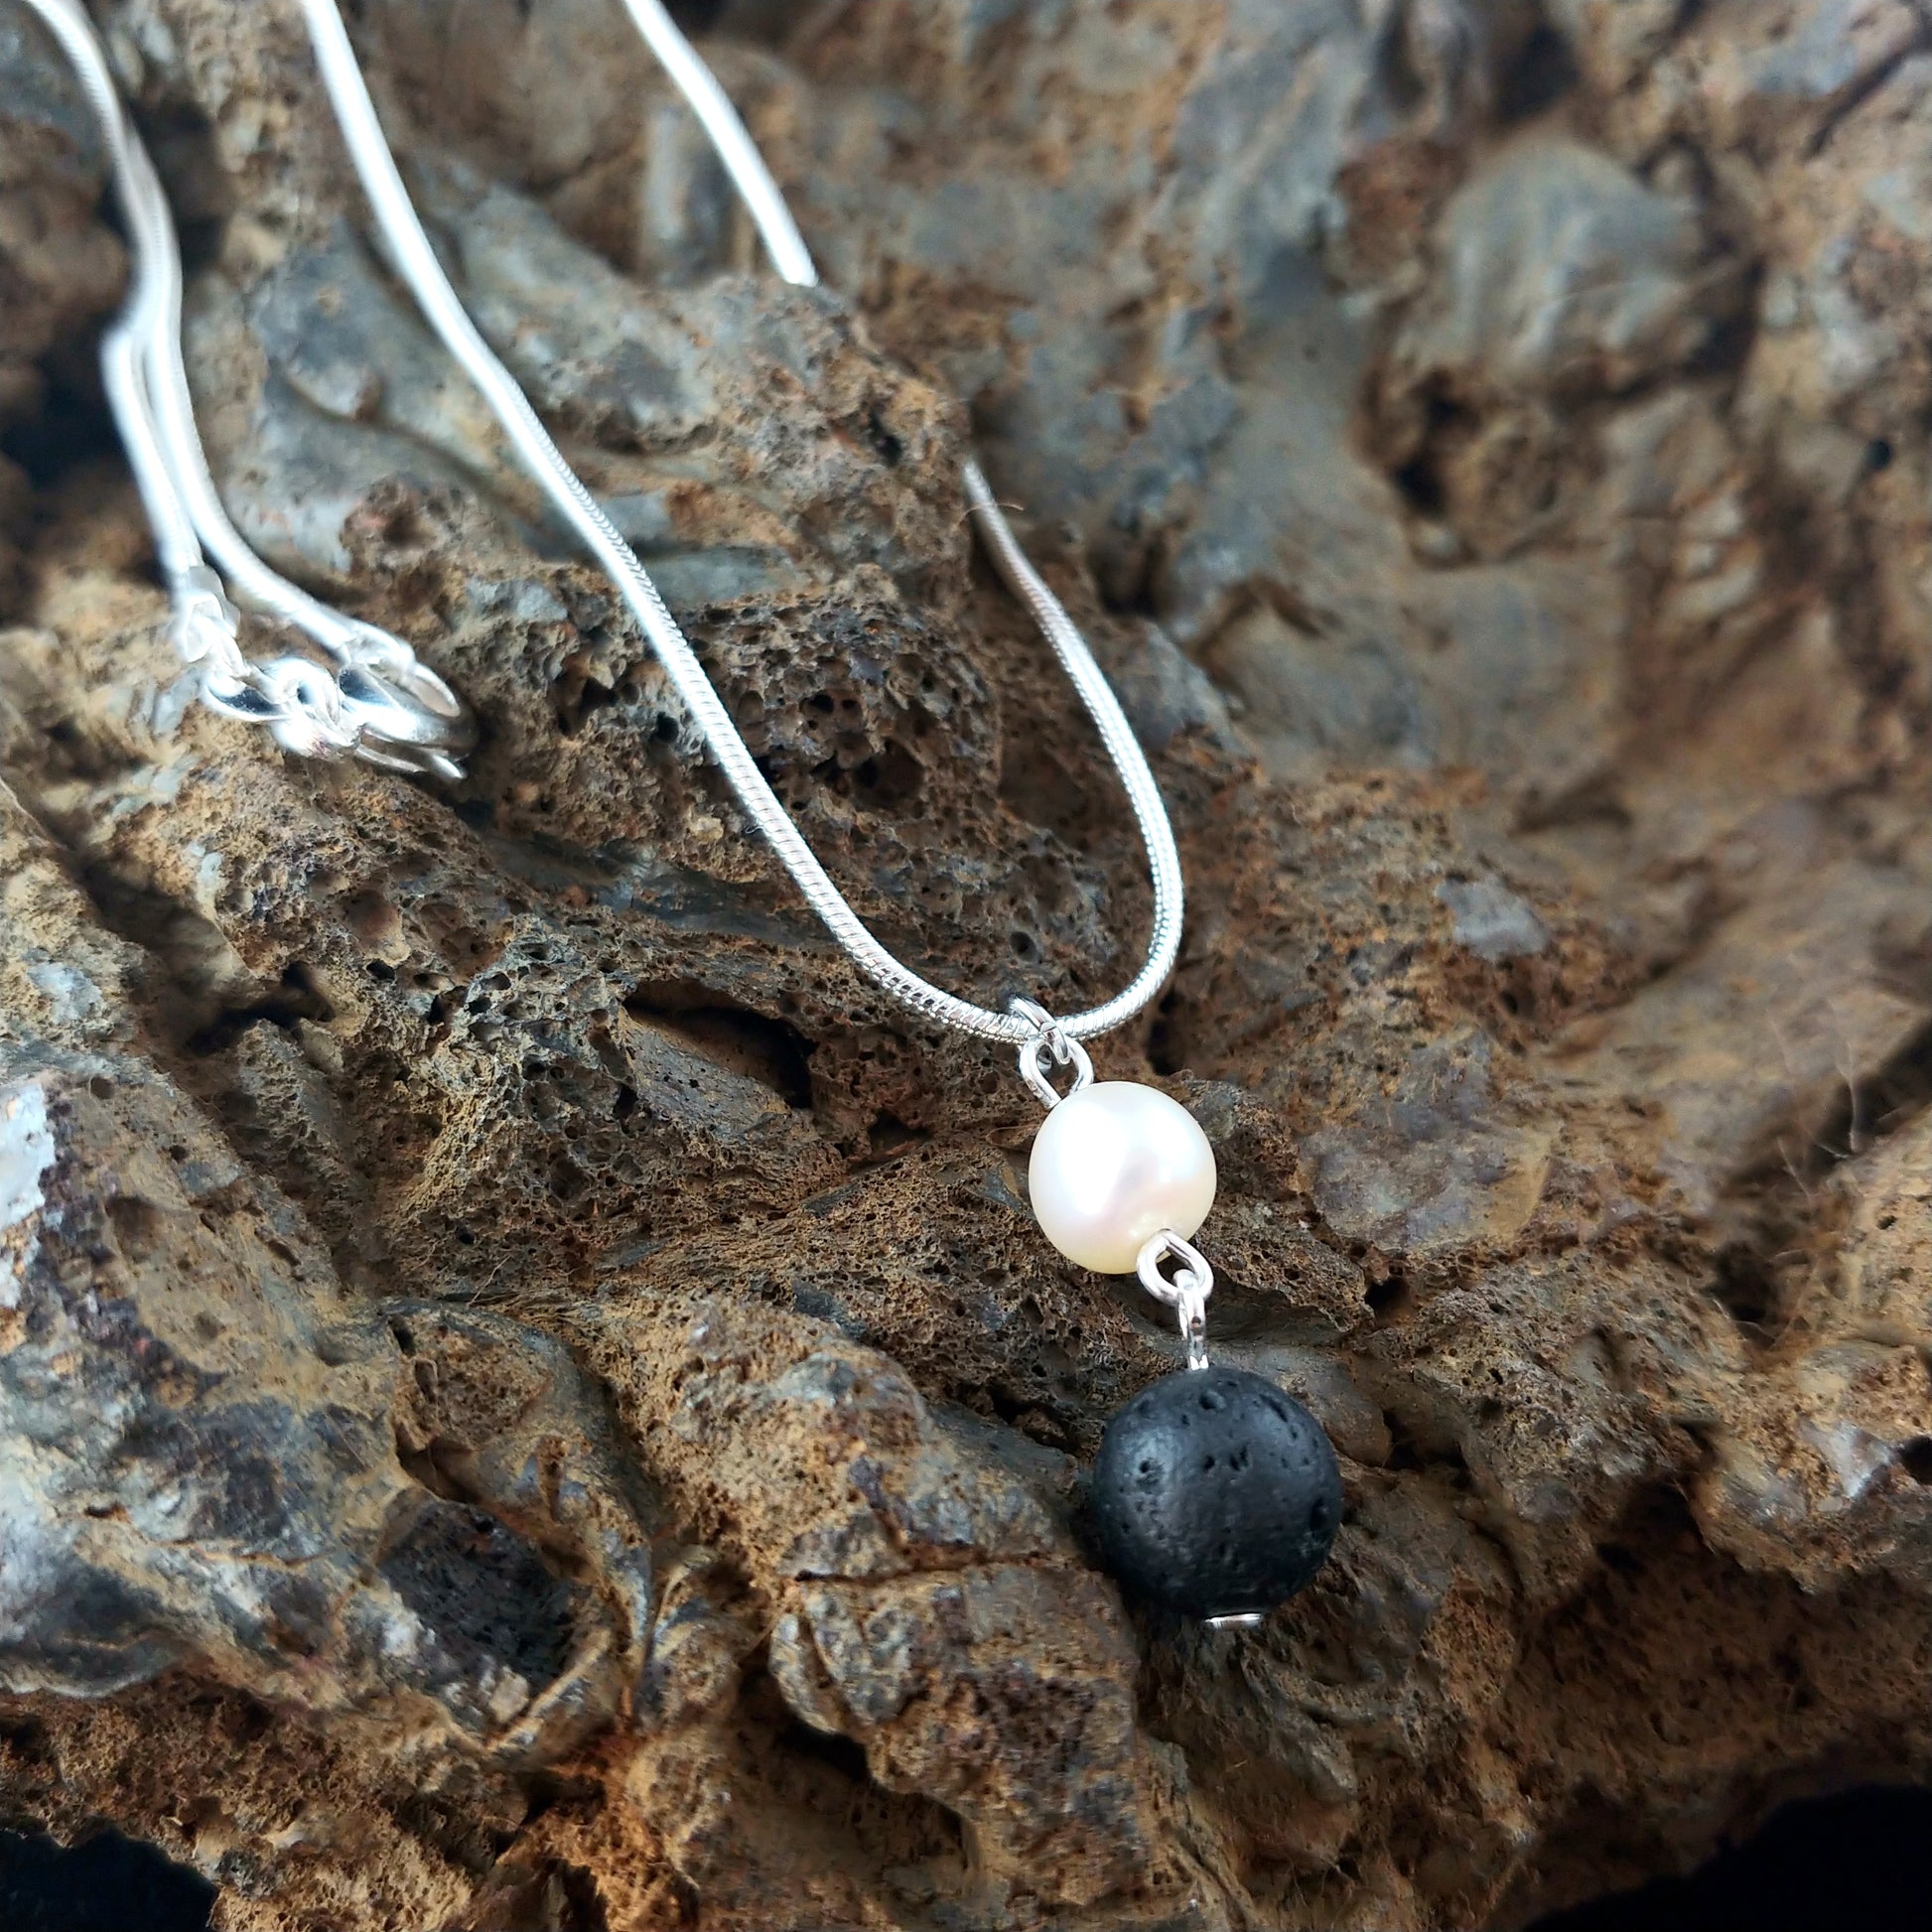 freshwater pearl necklace sitting on top of an old dark magma rock display. The necklace has a silver colored snake chain. The pendant is made from lava and freshwater pearl.